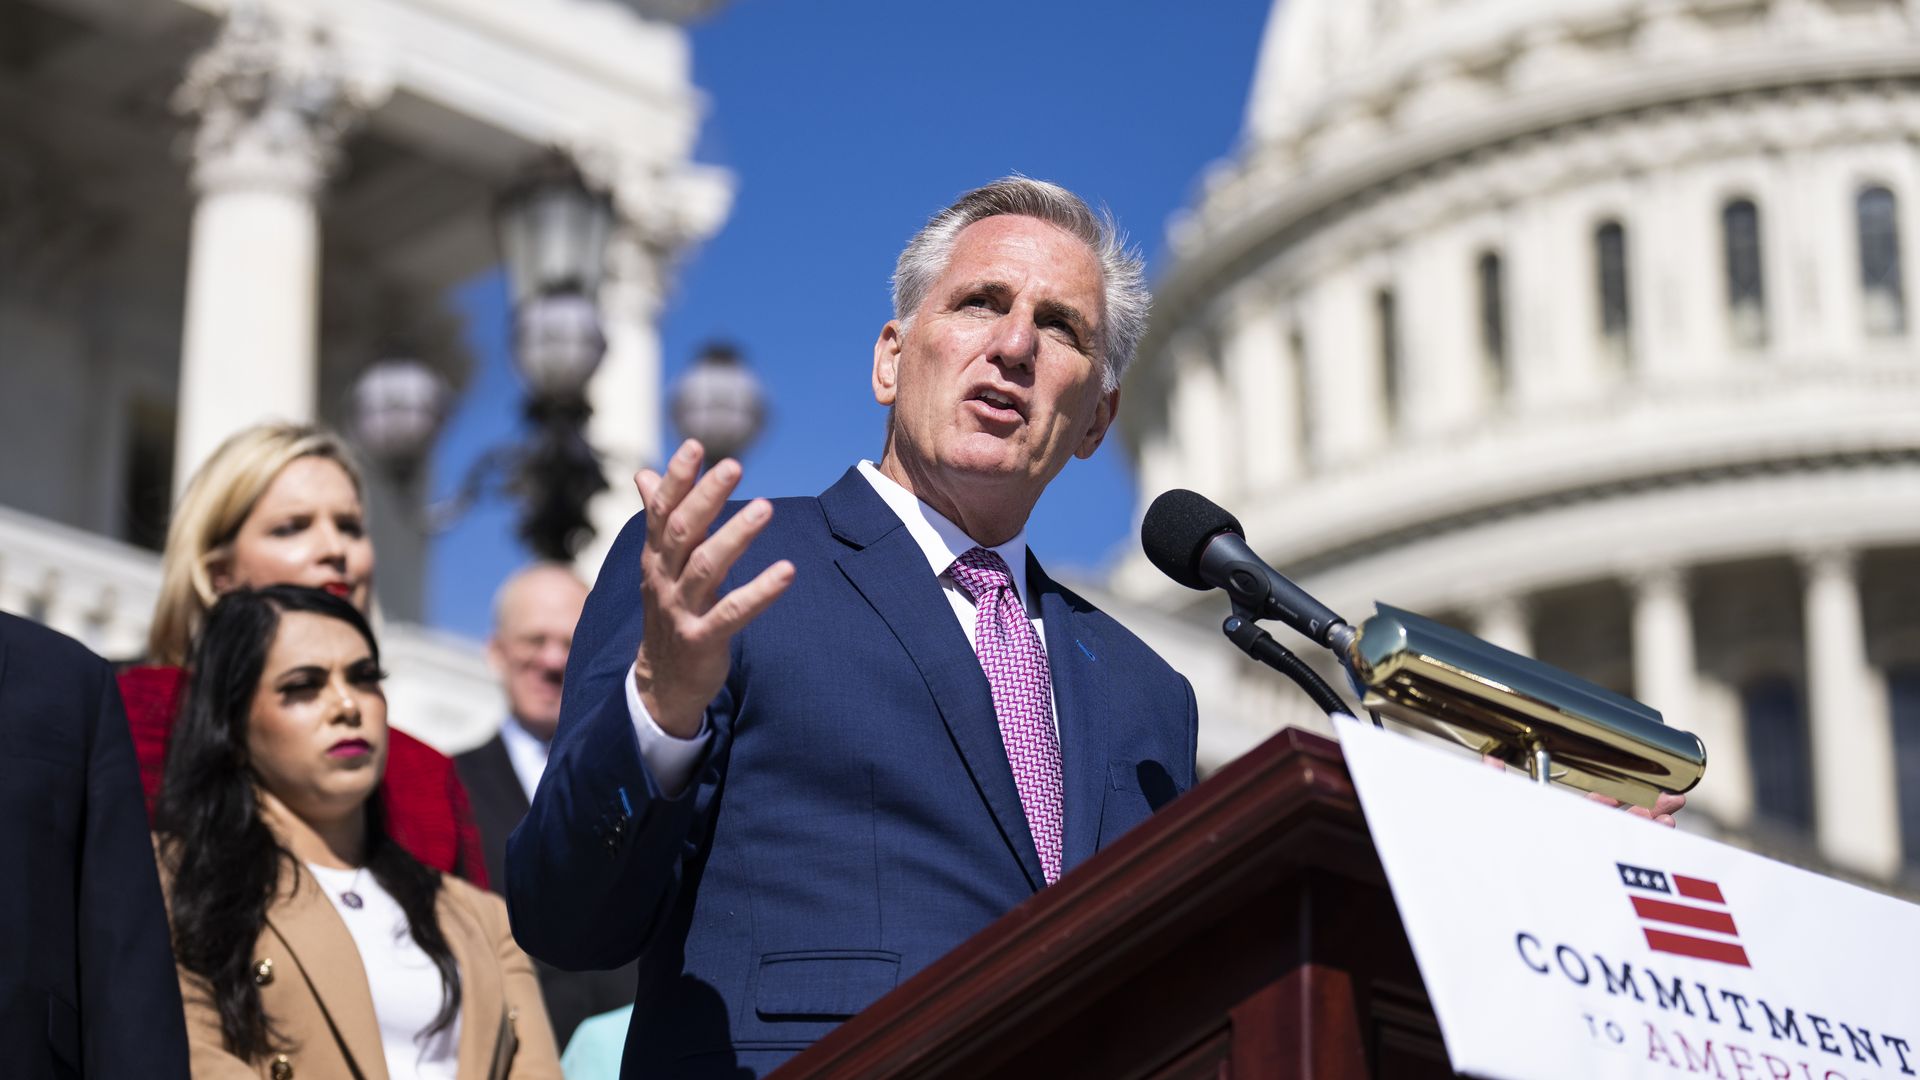 Kevin McCarthy speaks at a press conference about the Commitment to America